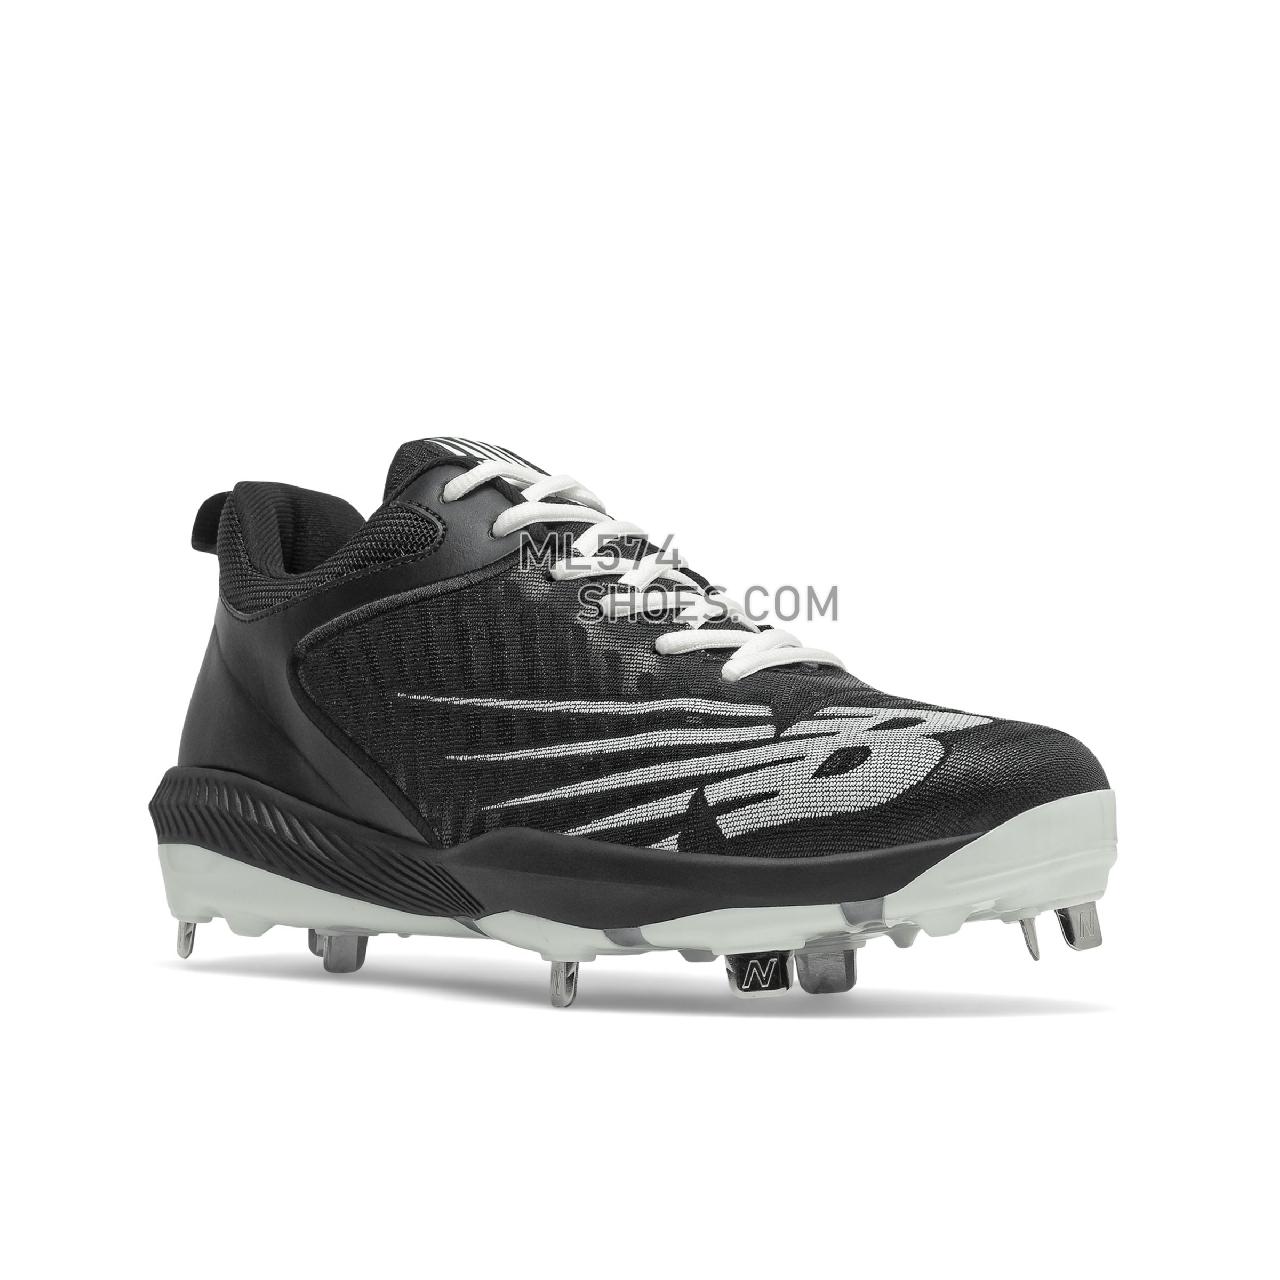 New Balance FuelCell 4040 v6 Metal - Men's Mid-Cut Baseball Cleats - Black with White - L4040BK6